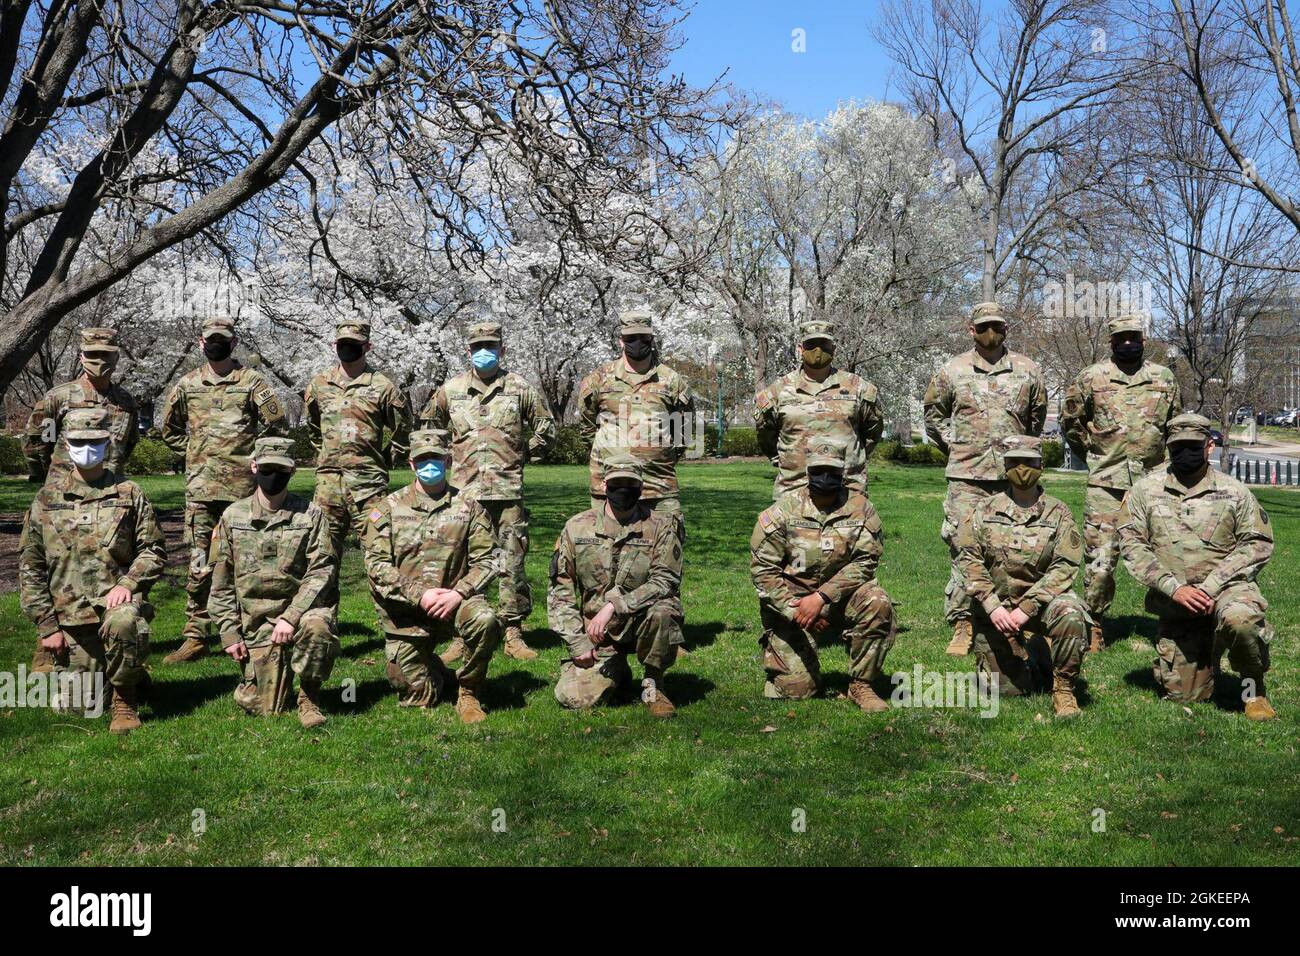 U.S. Soldiers with the Kentucky National Guard pose for a photograph with U.S. Air Force Brig. Gen. Charles Walker, top row, far right, chief of staff, Kentucky Air National Guard, near the U.S. Capitol in Washington, D.C., March 30, 2021. The National Guard has been requested to continue supporting federal law enforcement agencies with security, communications, medical evacuation, logistics, and safety support to state, district and federal agencies through mid-March. Stock Photo